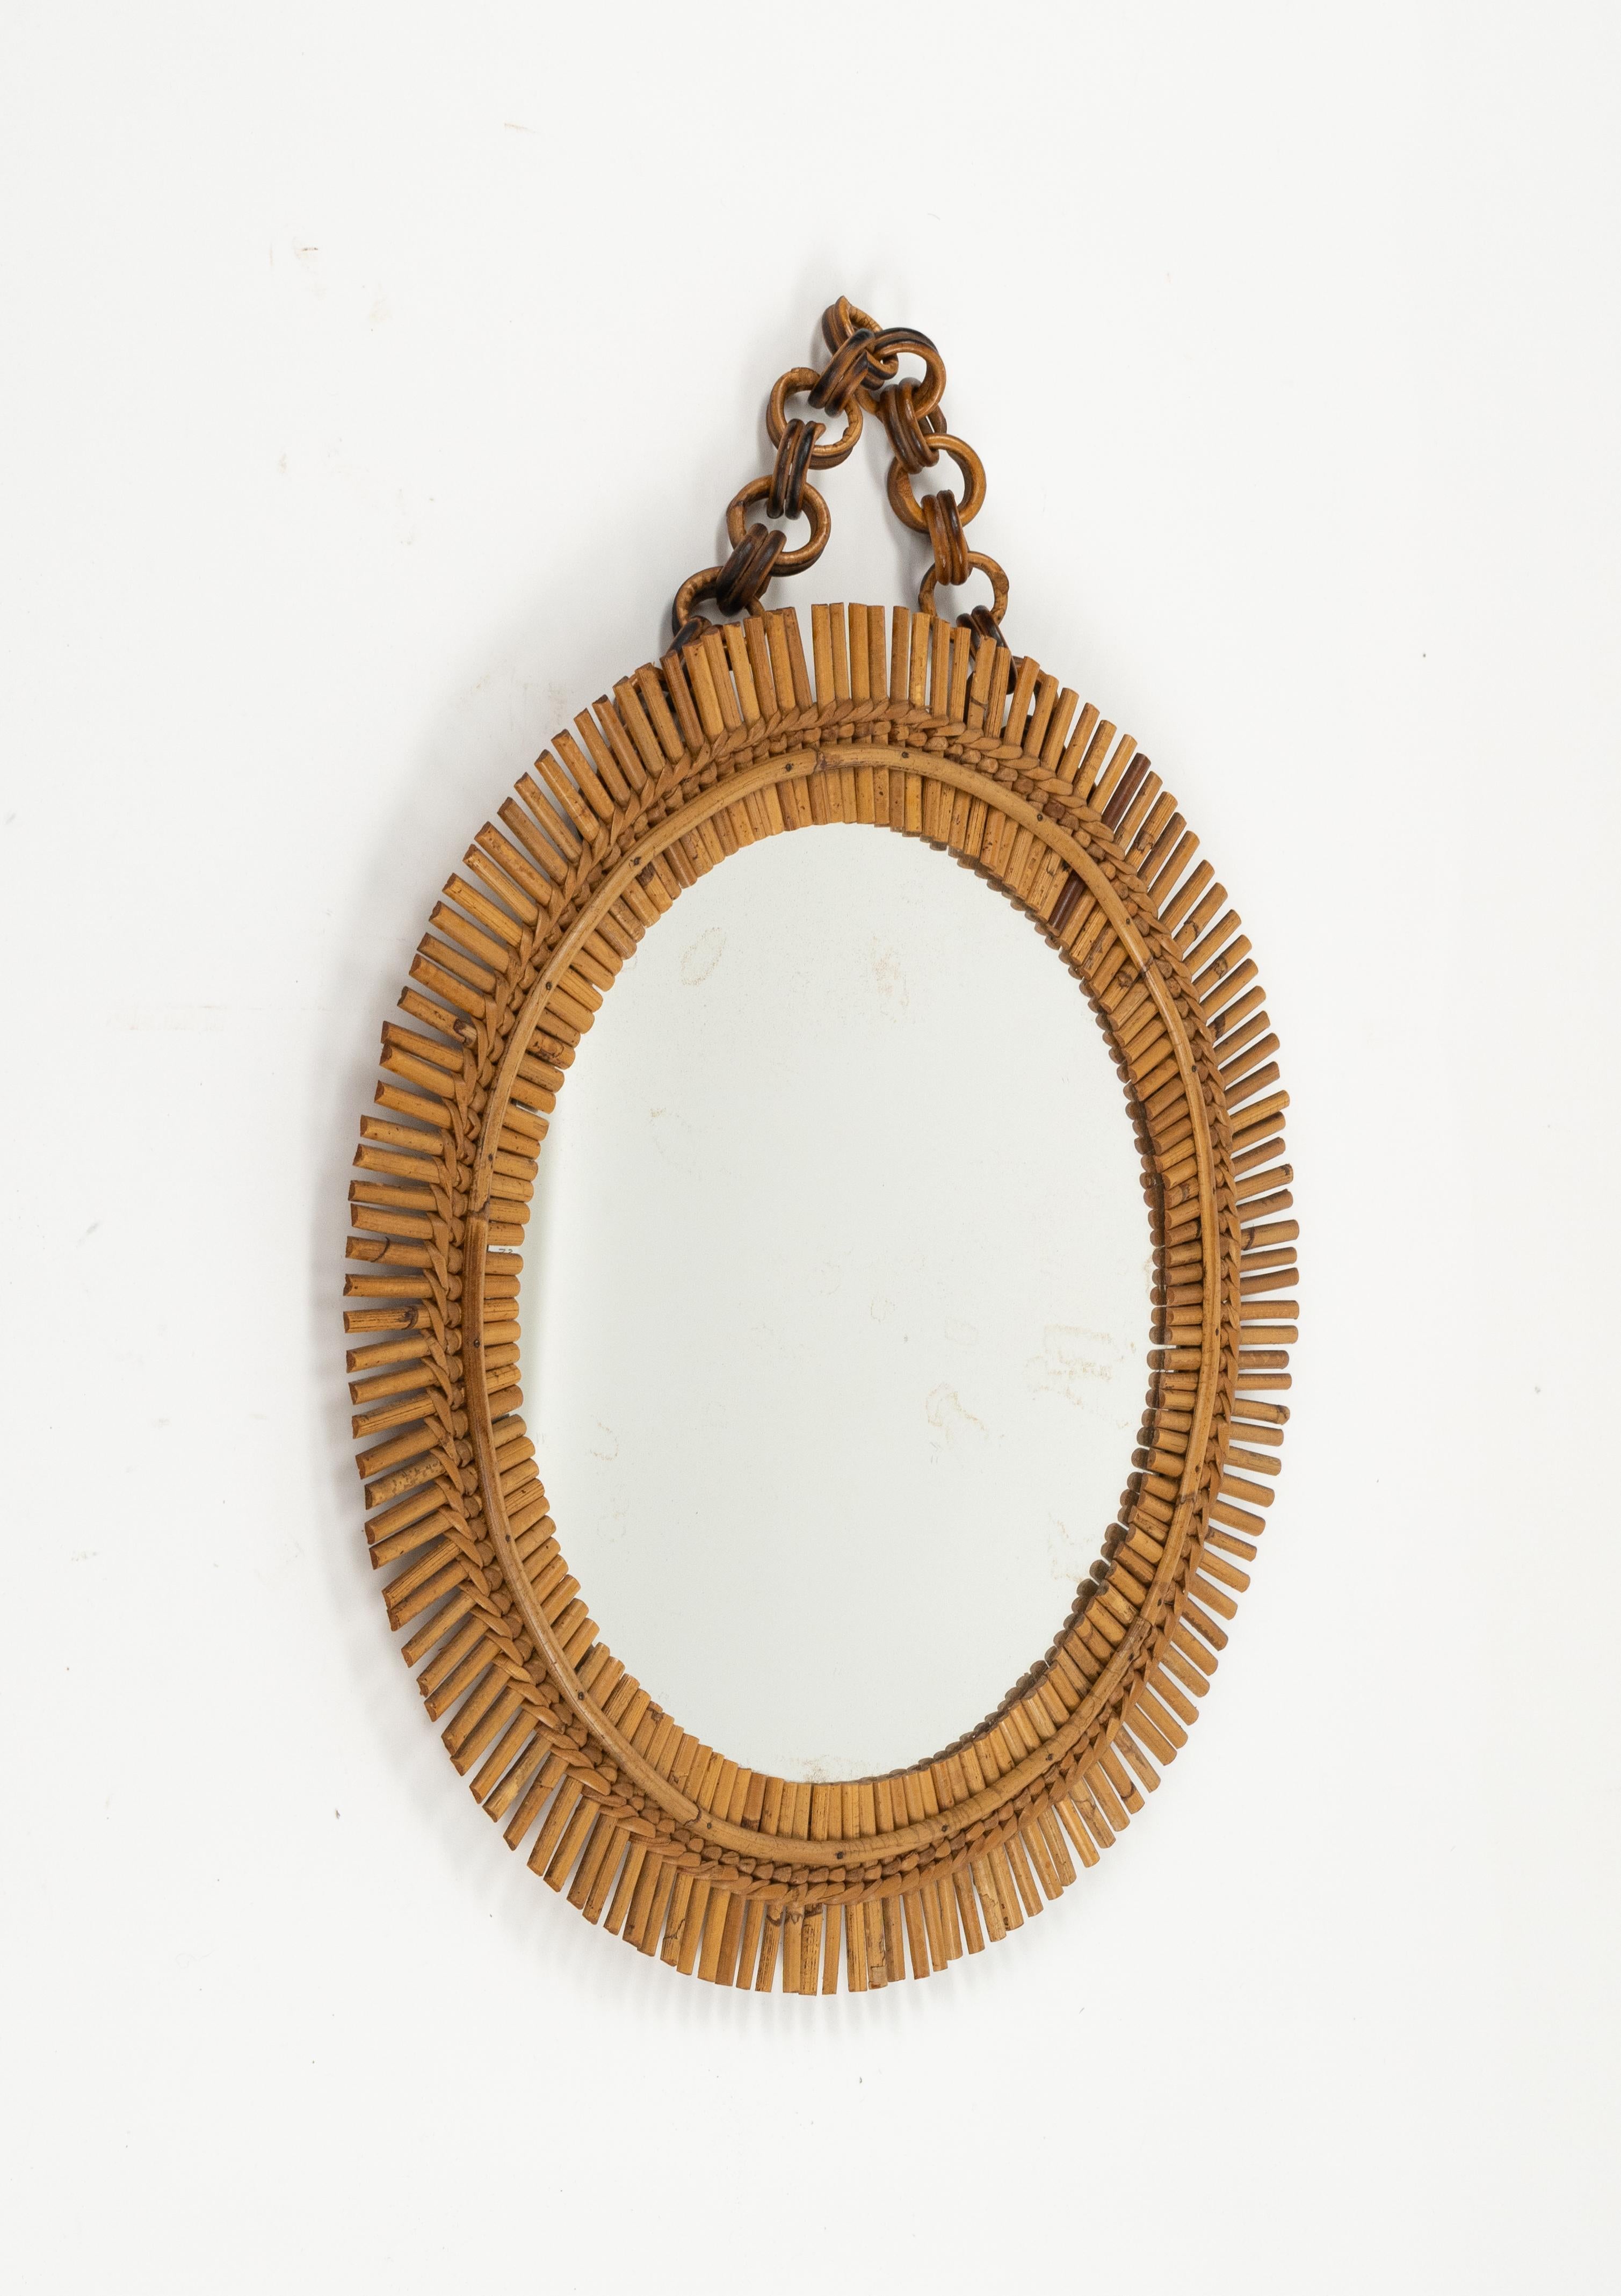 Midcentury beautiful round wall mirror with chain in bamboo and rattan in the style of Franco Albini.  

Made in Italy in the 1960s.   

A highly decorative mirror. 

The mirror, original of the period, shows signs of discolouration.
